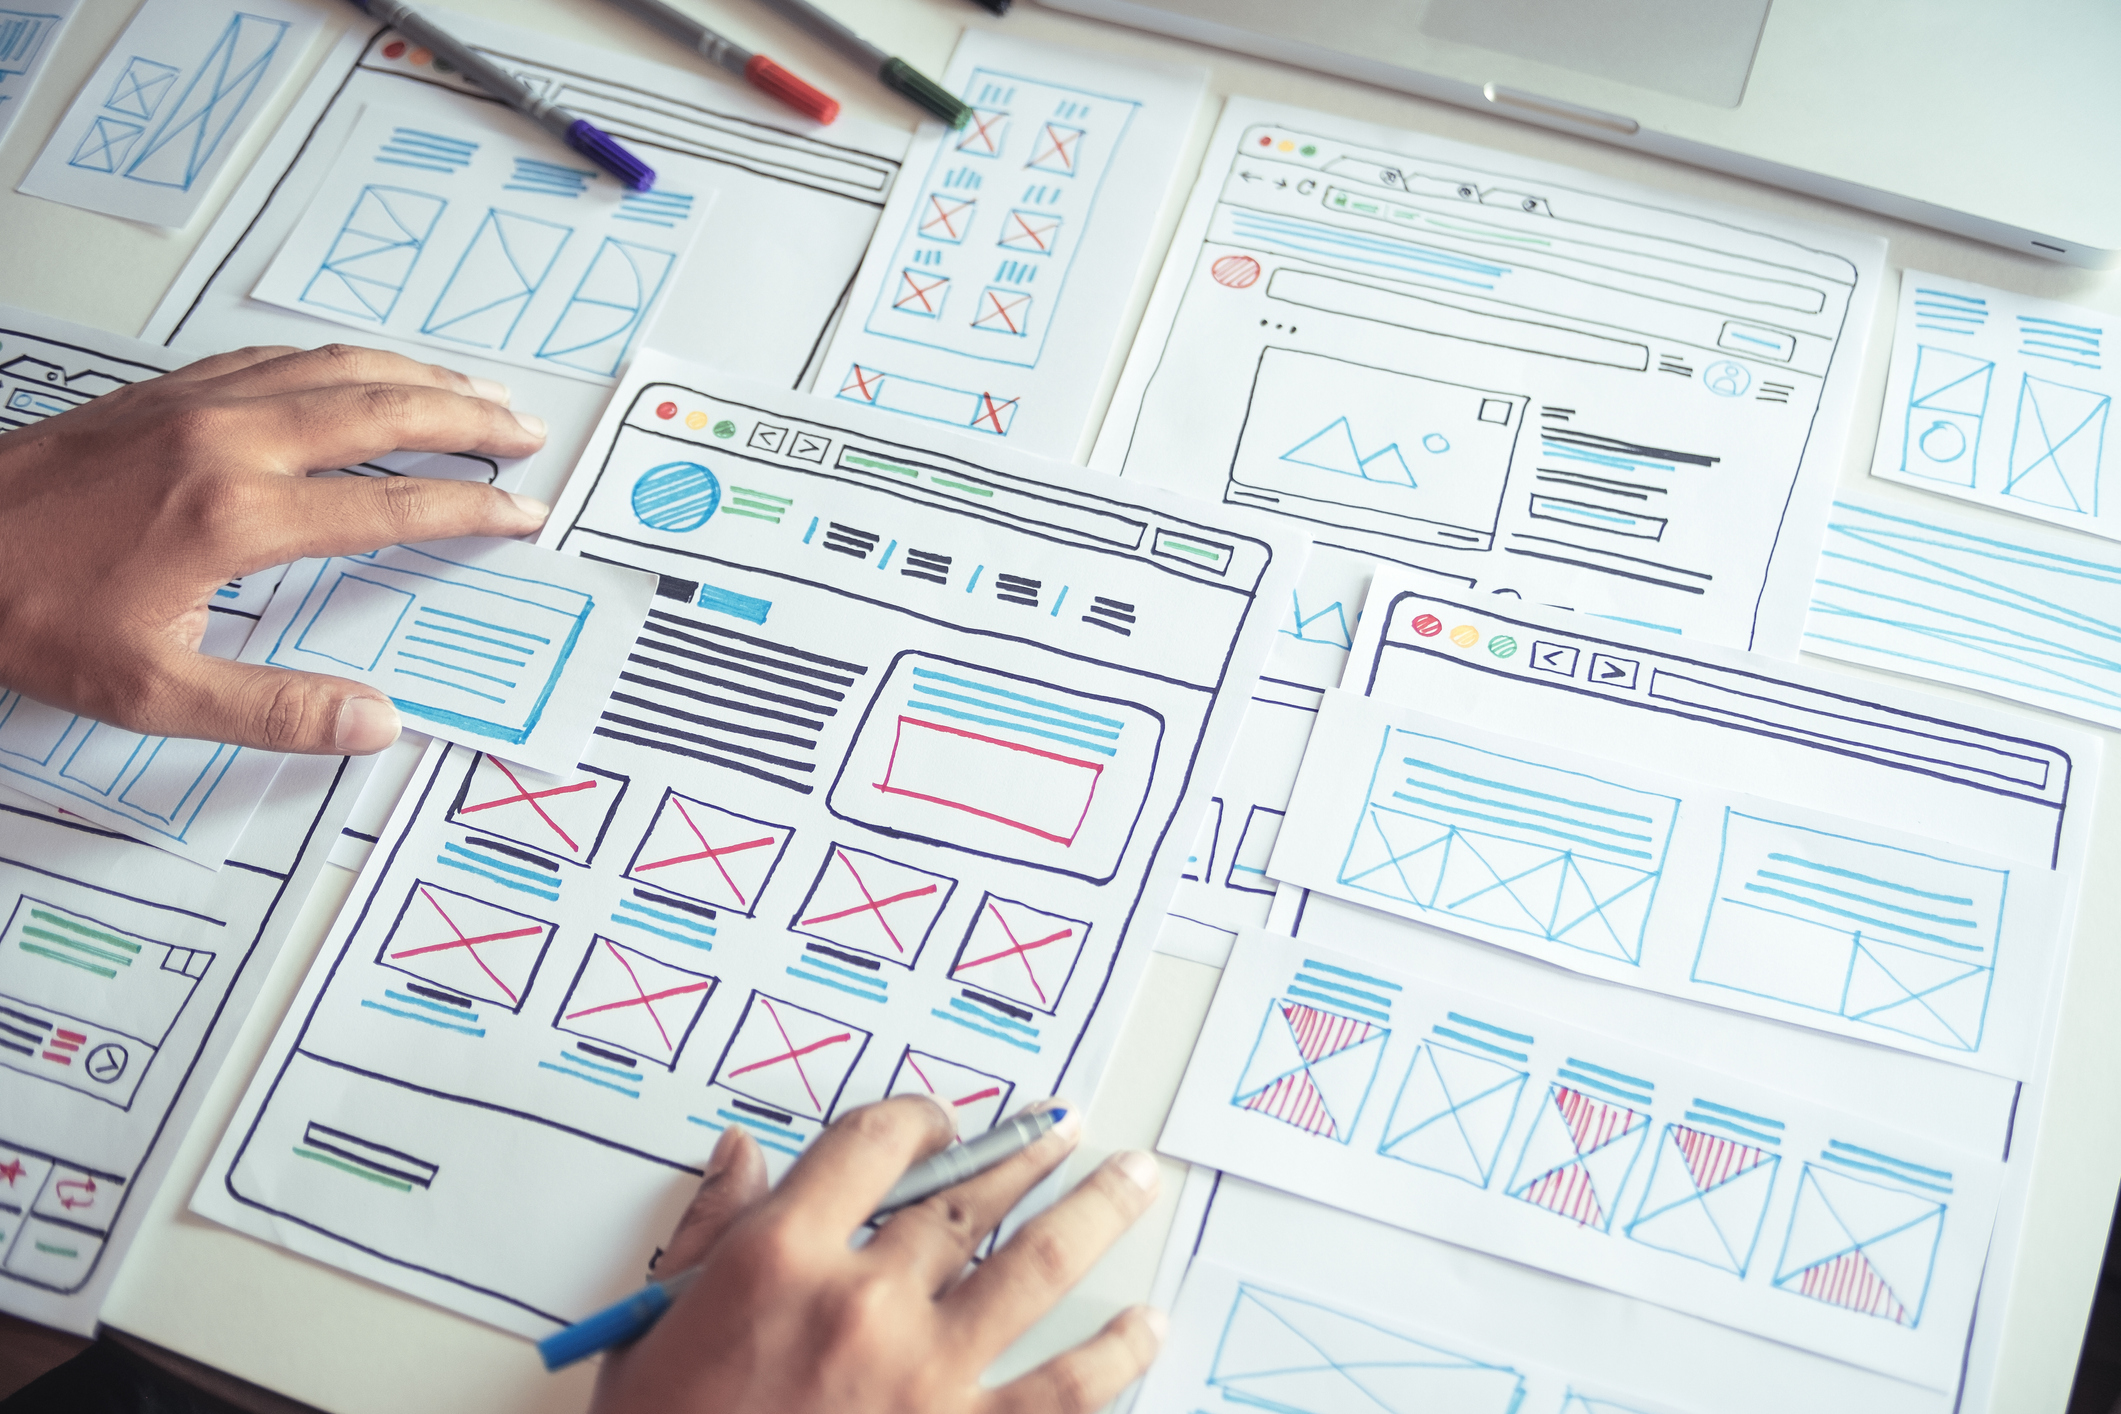 Creative website planning requires the right tools